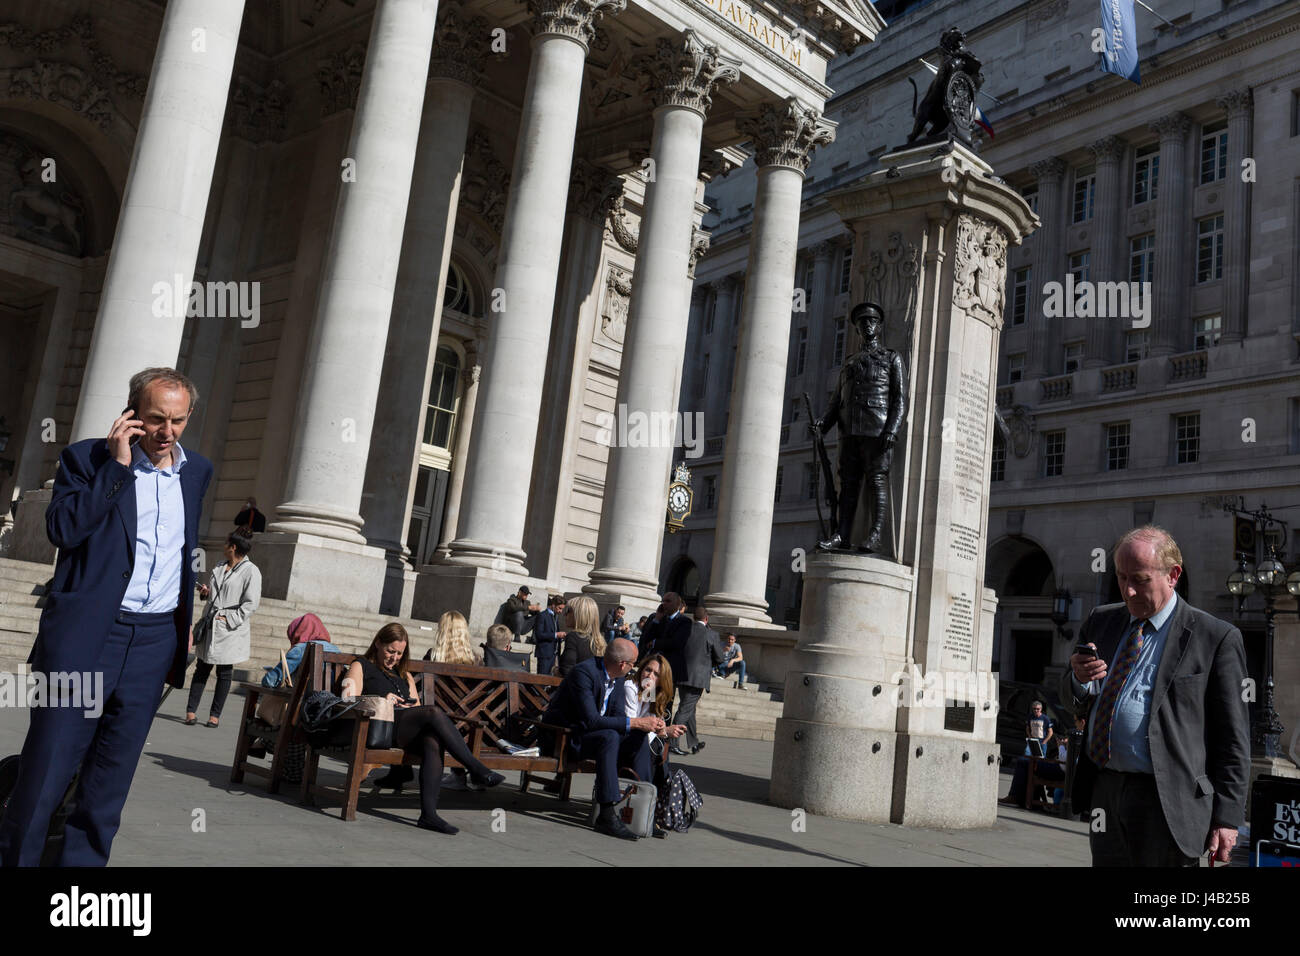 Businessmen check messages below the classical architecture of Royal Exchange and the WW1 war memorial at Bank Triangle, on 10th May 2017, in the City of London, England. Stock Photo